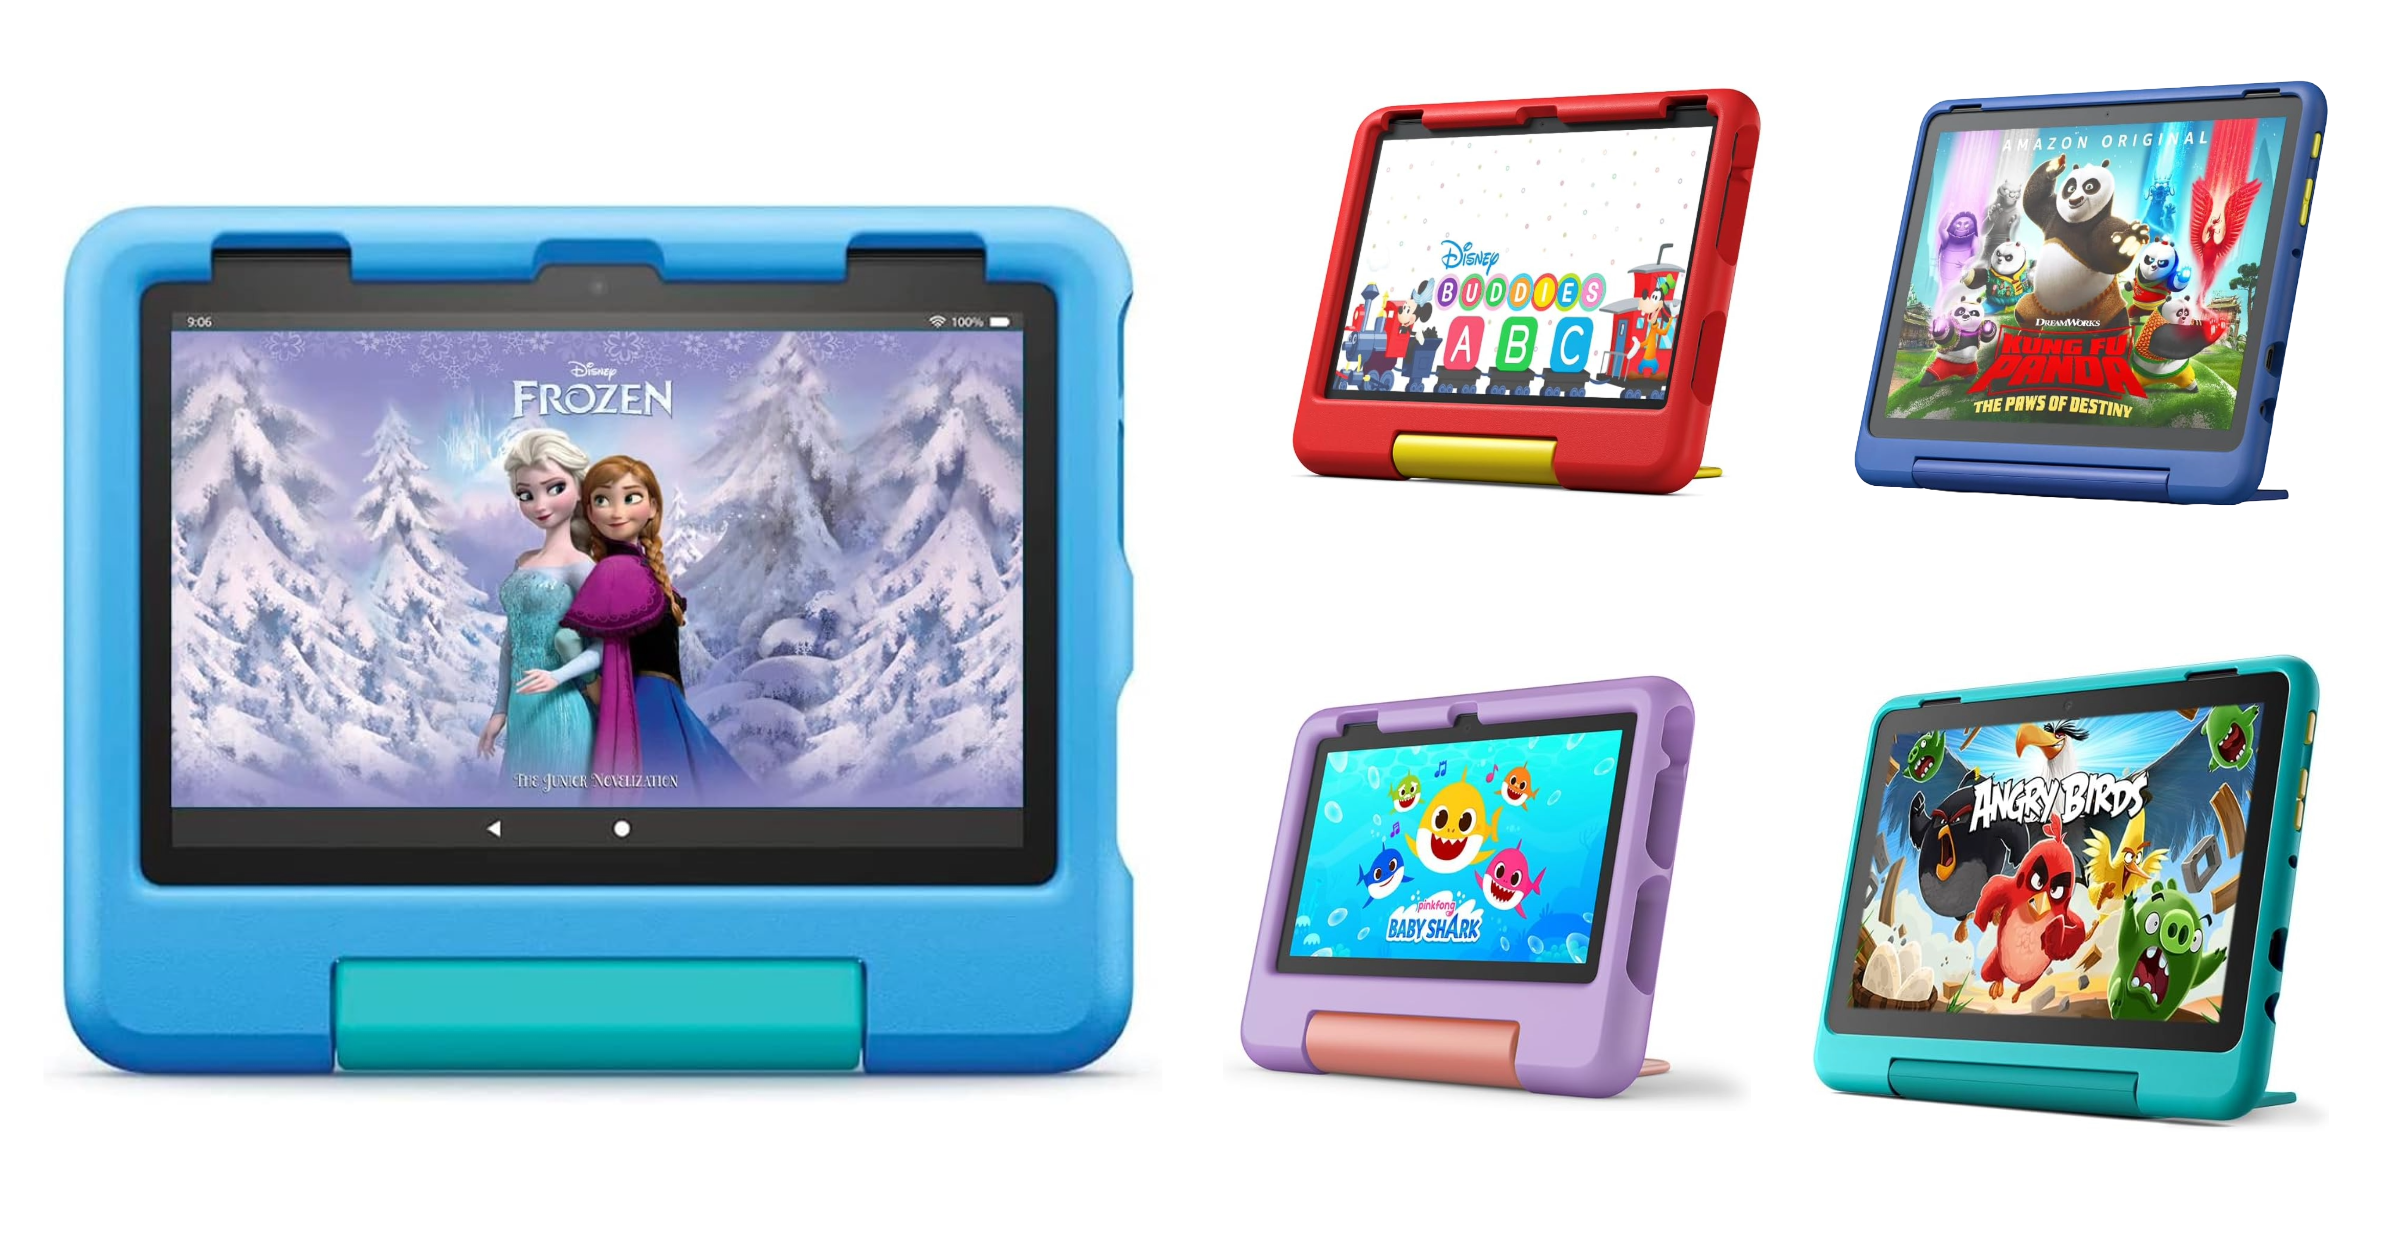 Amazon's kid-friendly tablets are now up to 47% off 